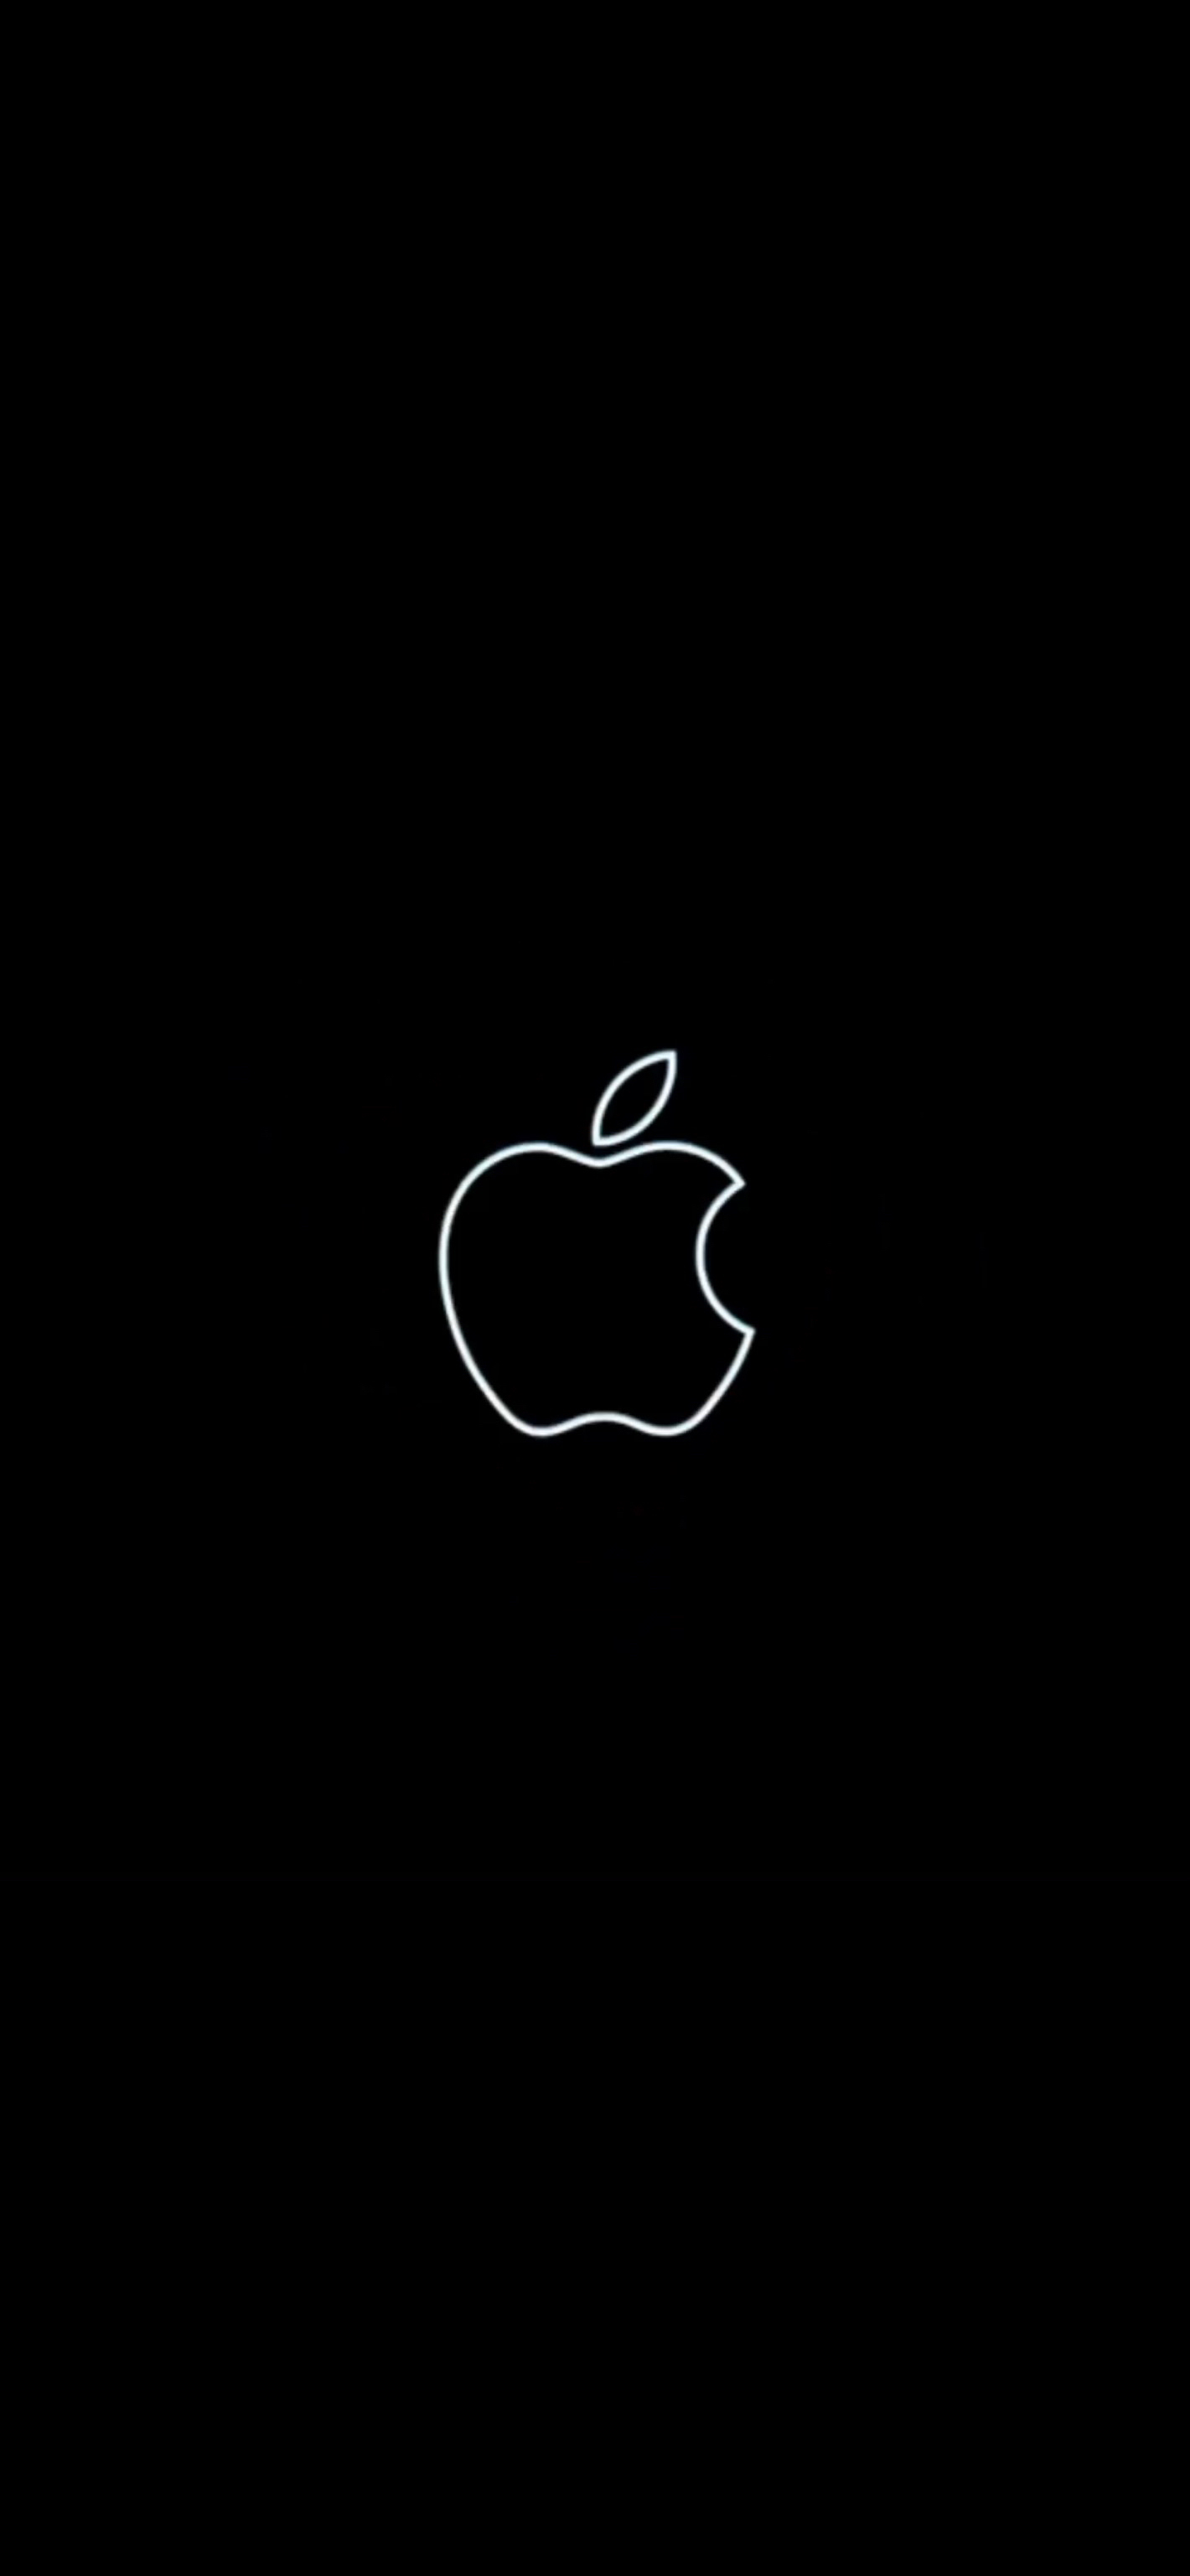 Apple - While Logo on Black Background - Wallpapers Central